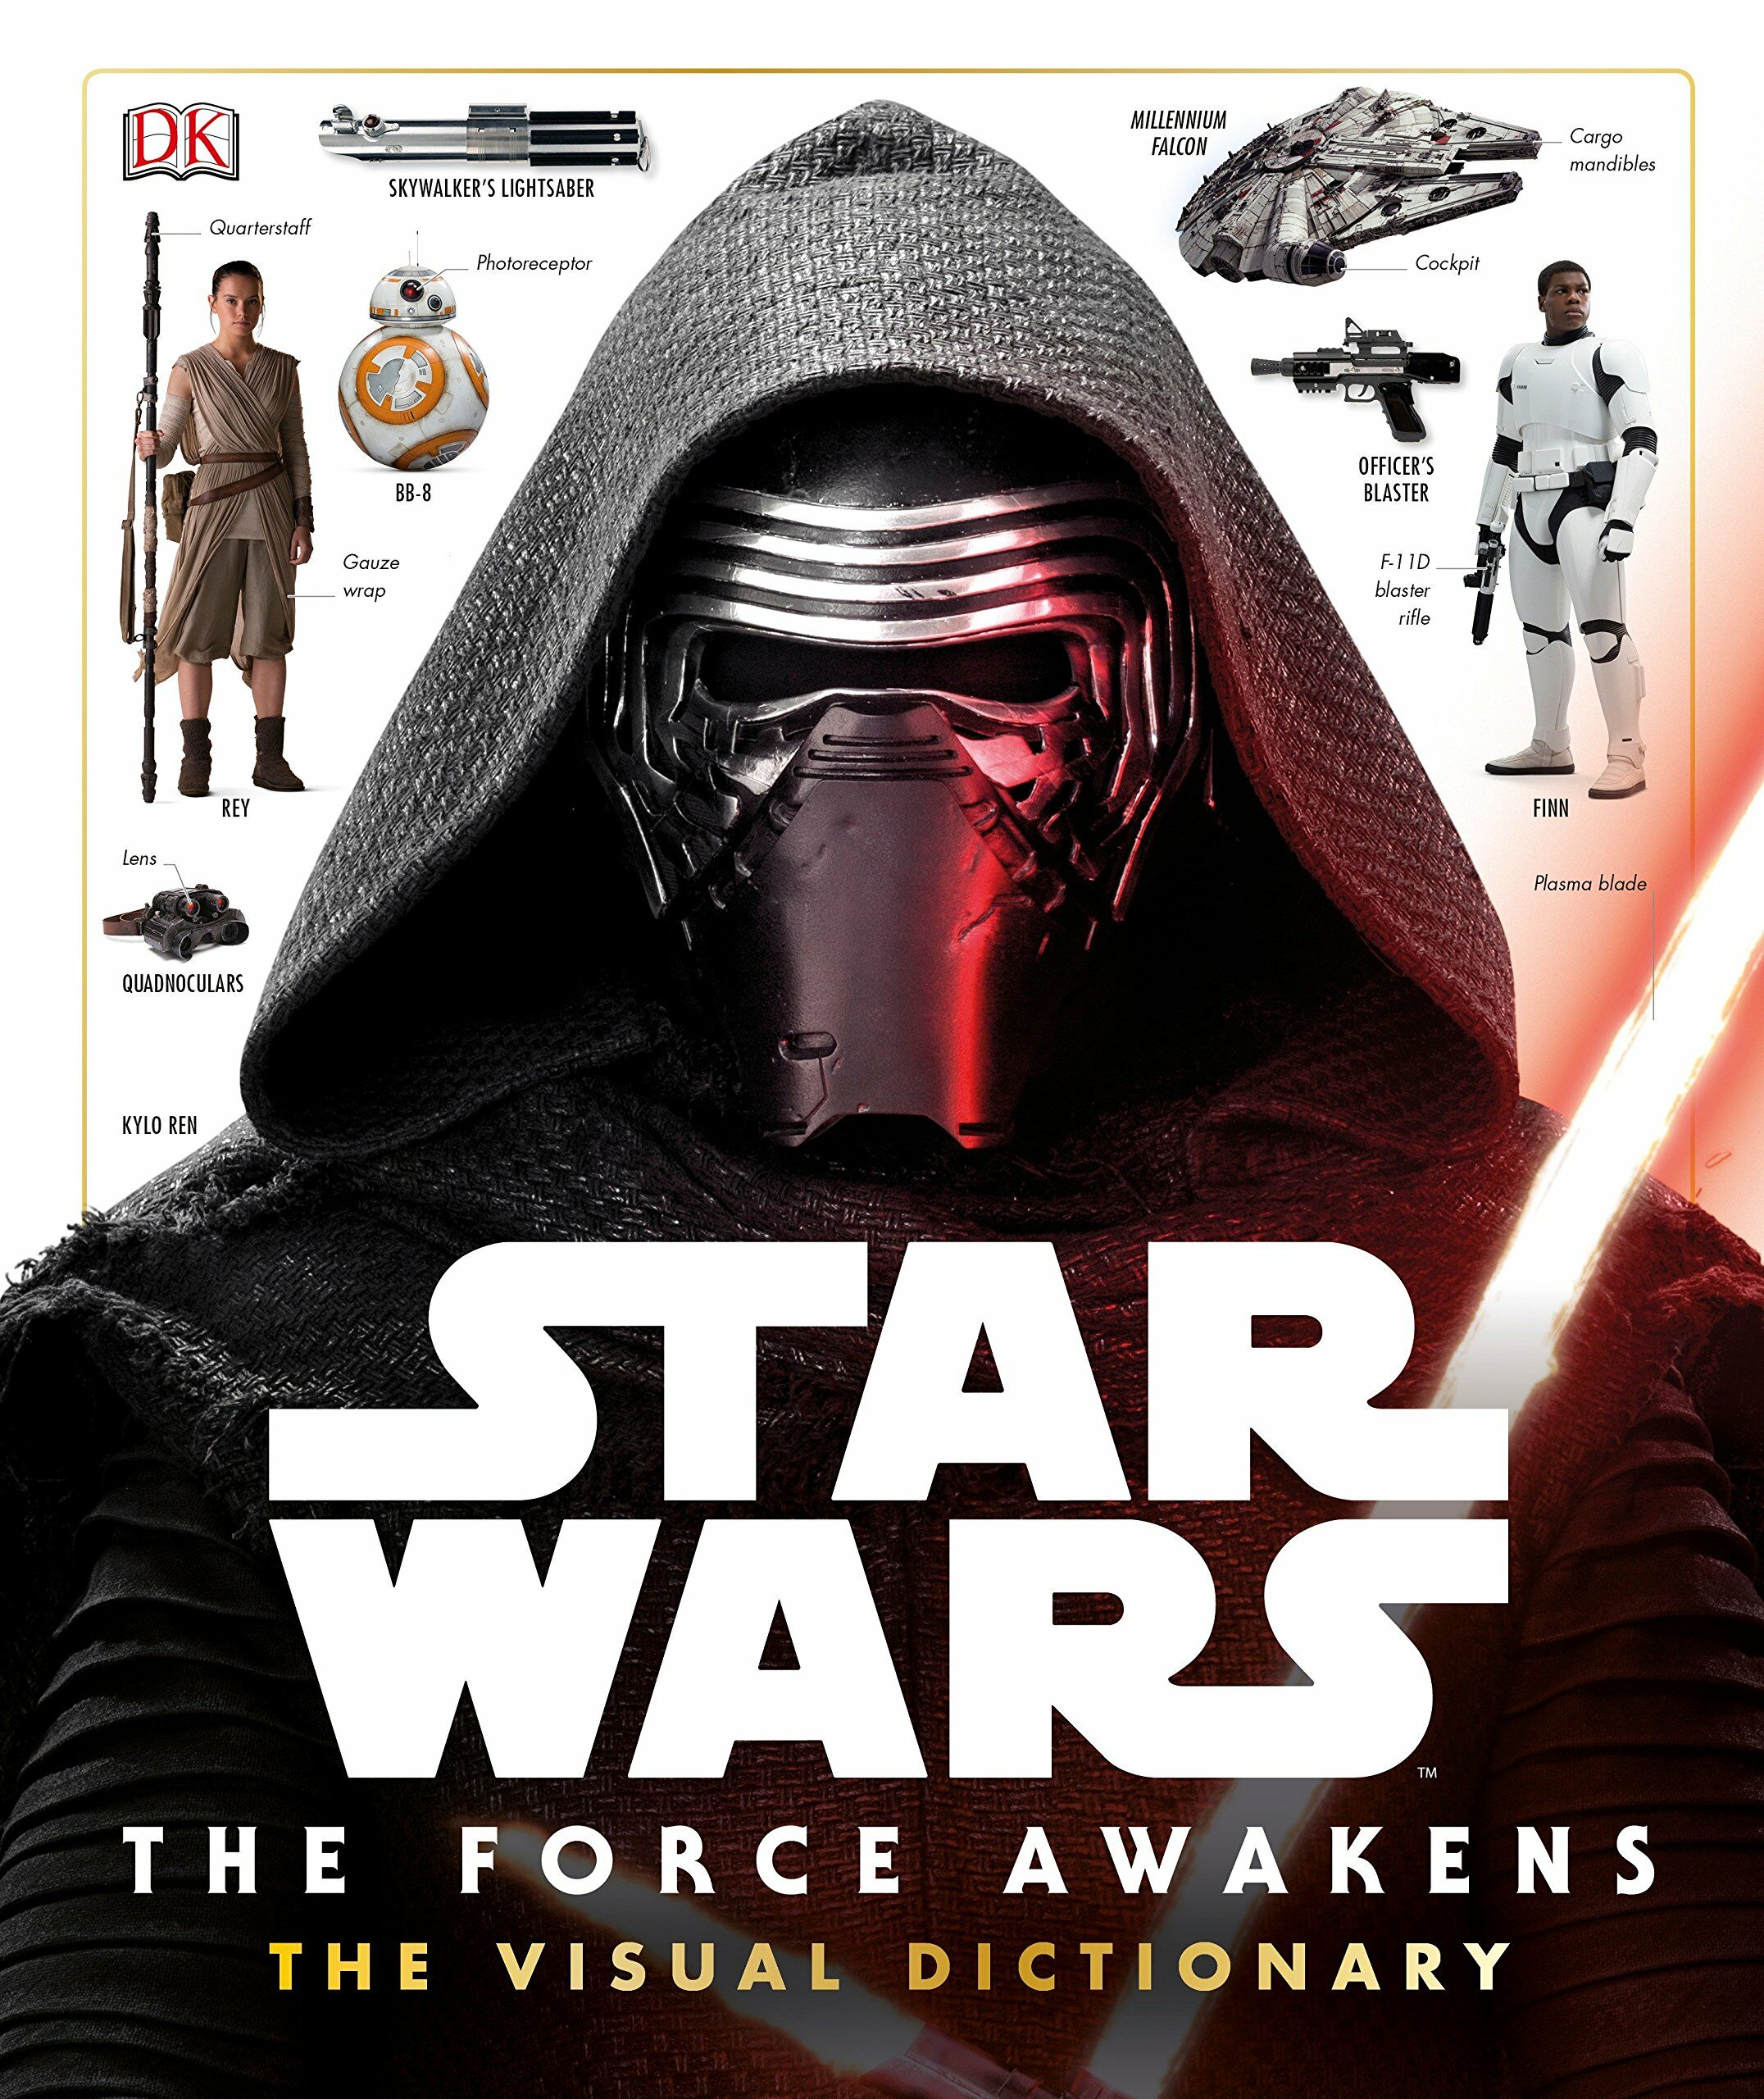 Star Wars: The Force Awakens the Visual Dictionary (Hardcover)